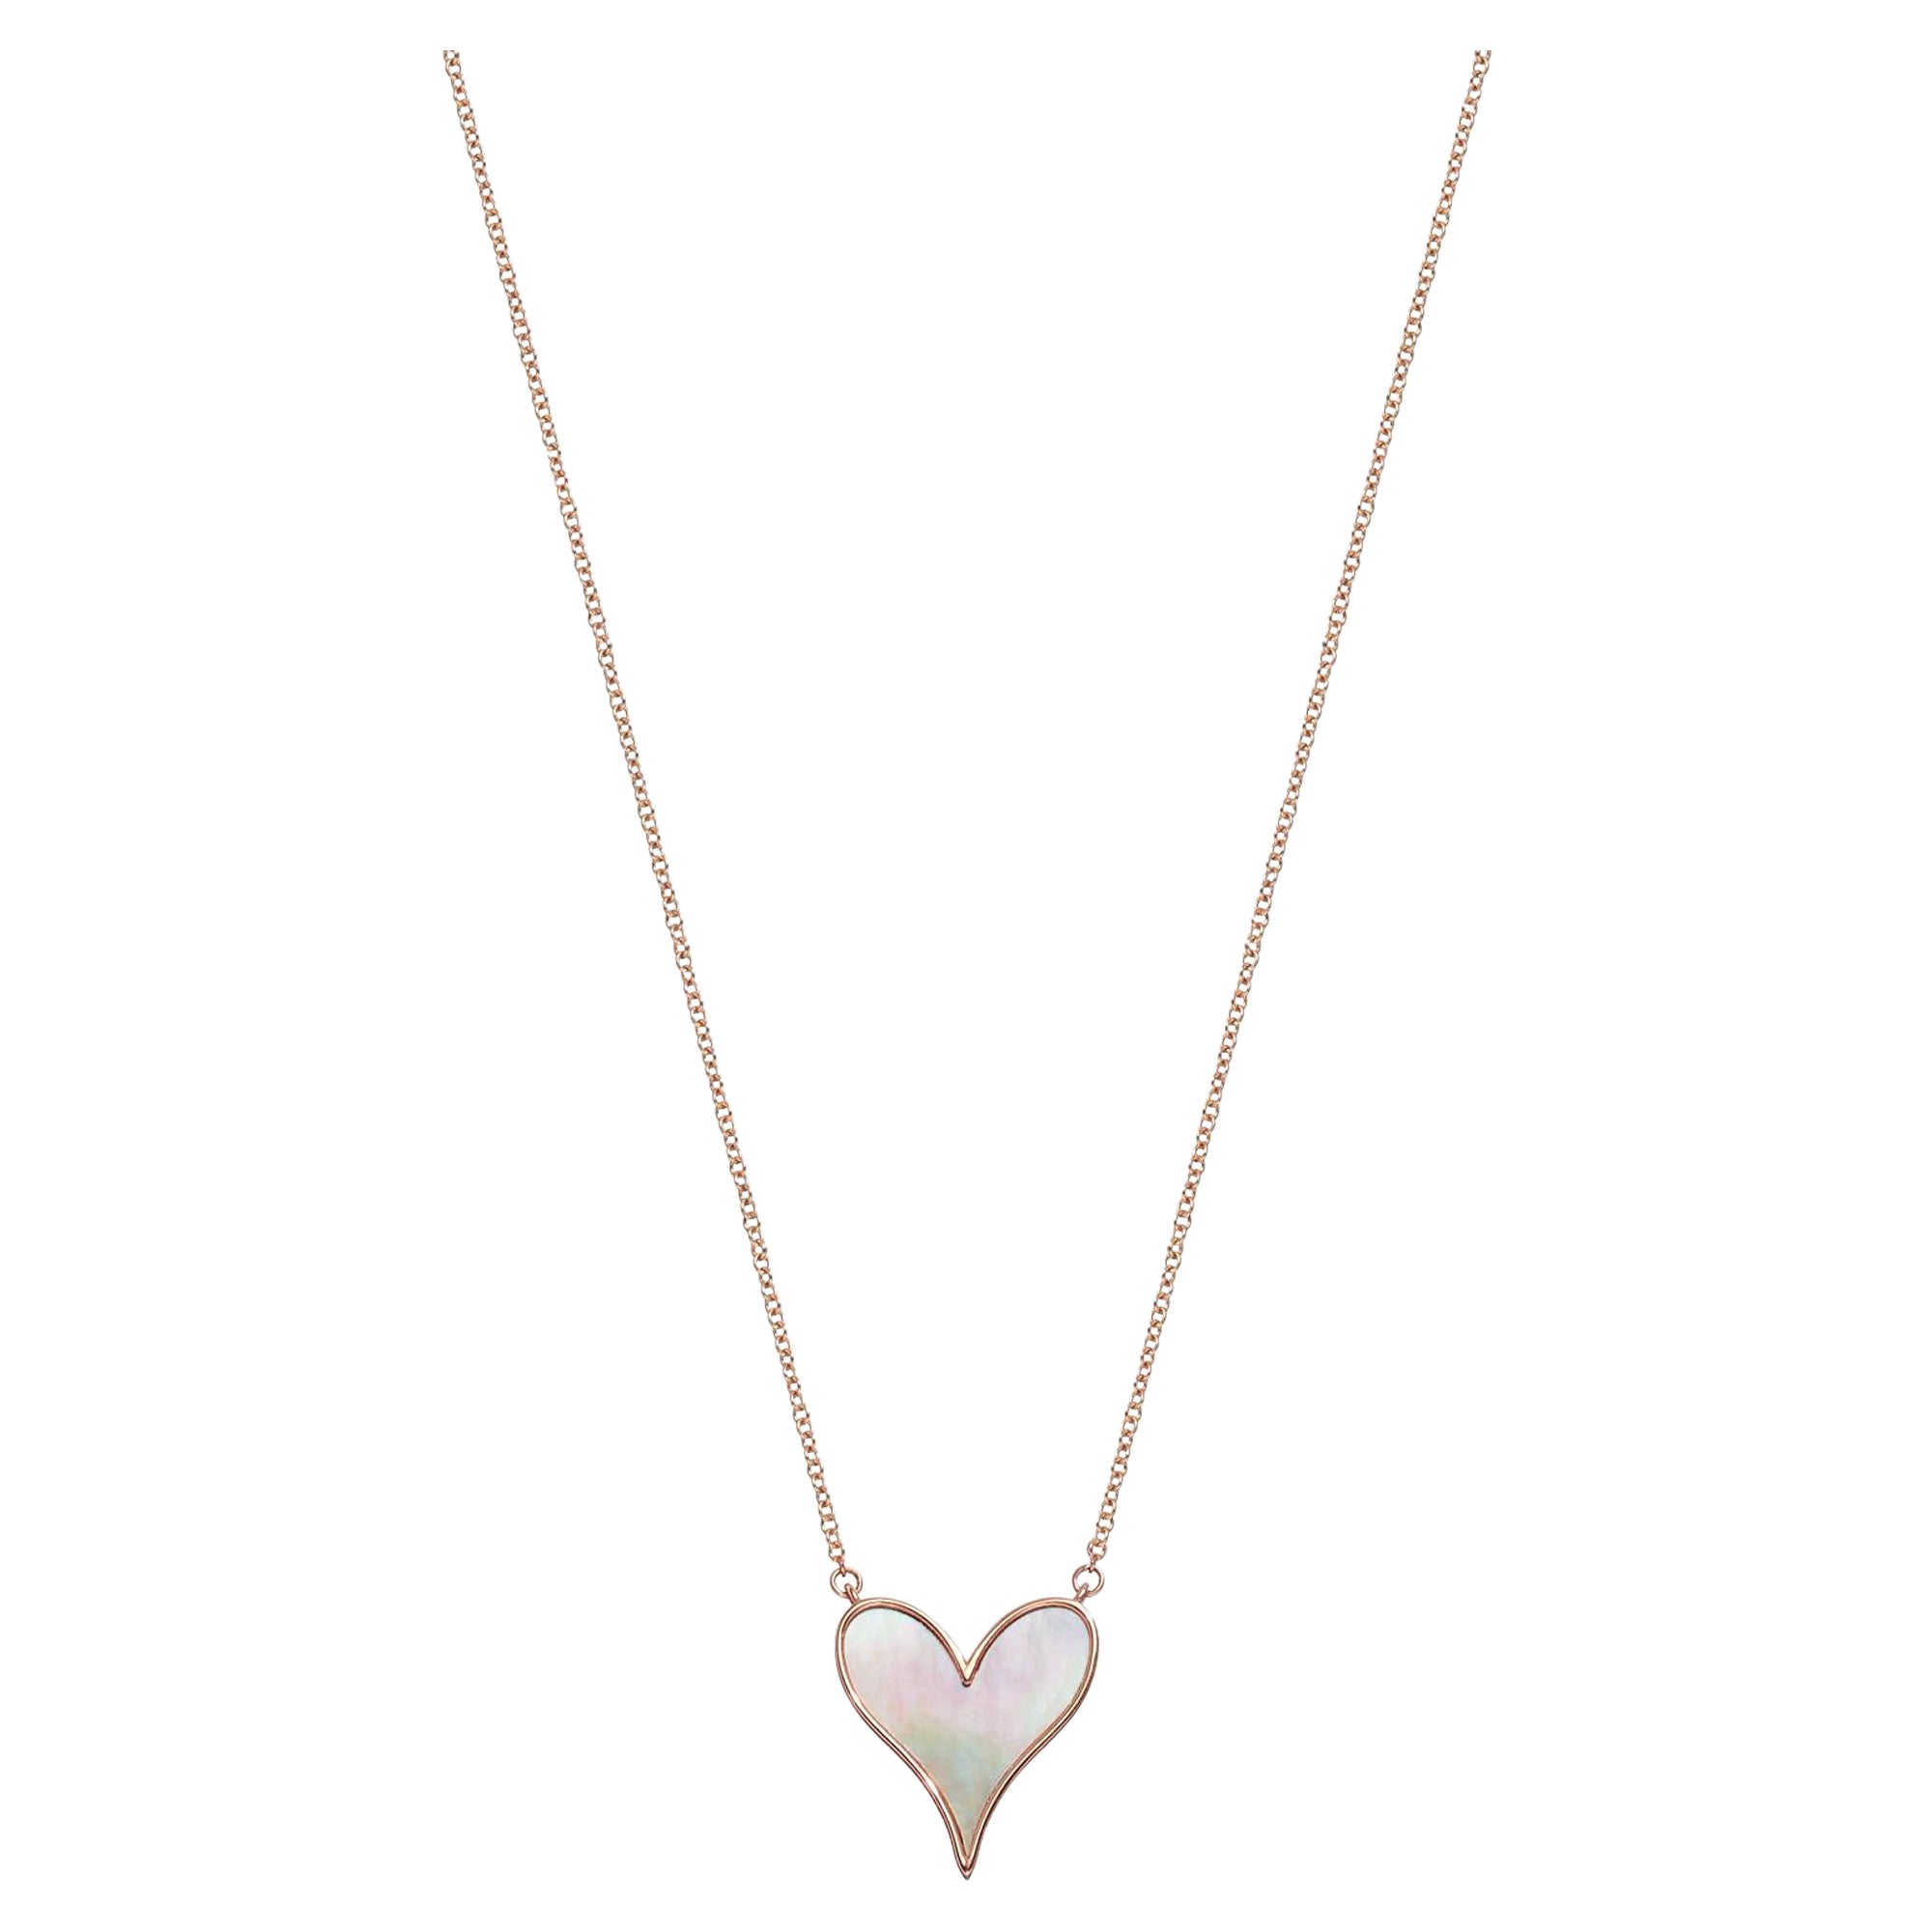 Roseate Jewelry Heart Pendant 15mm in 18k Rose Gold and Mother-of-Pearl